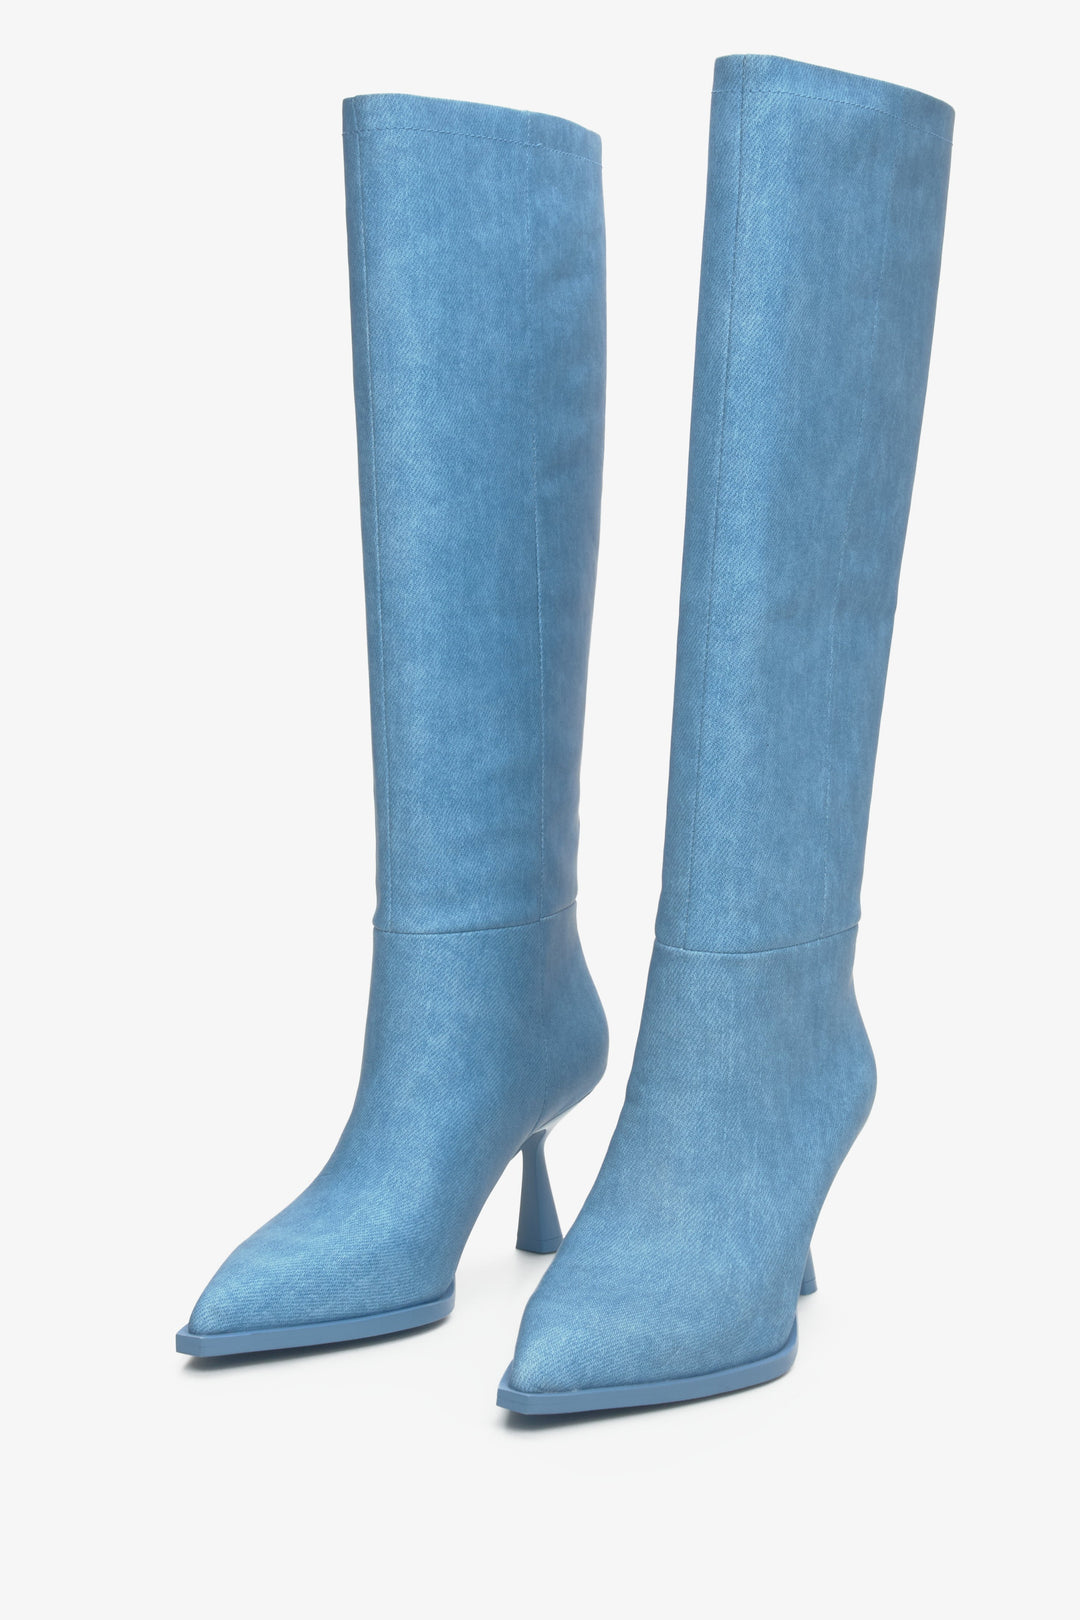 Knee-high blue women's boots by Estro with a pointed toe - close-up on the front of the boot.